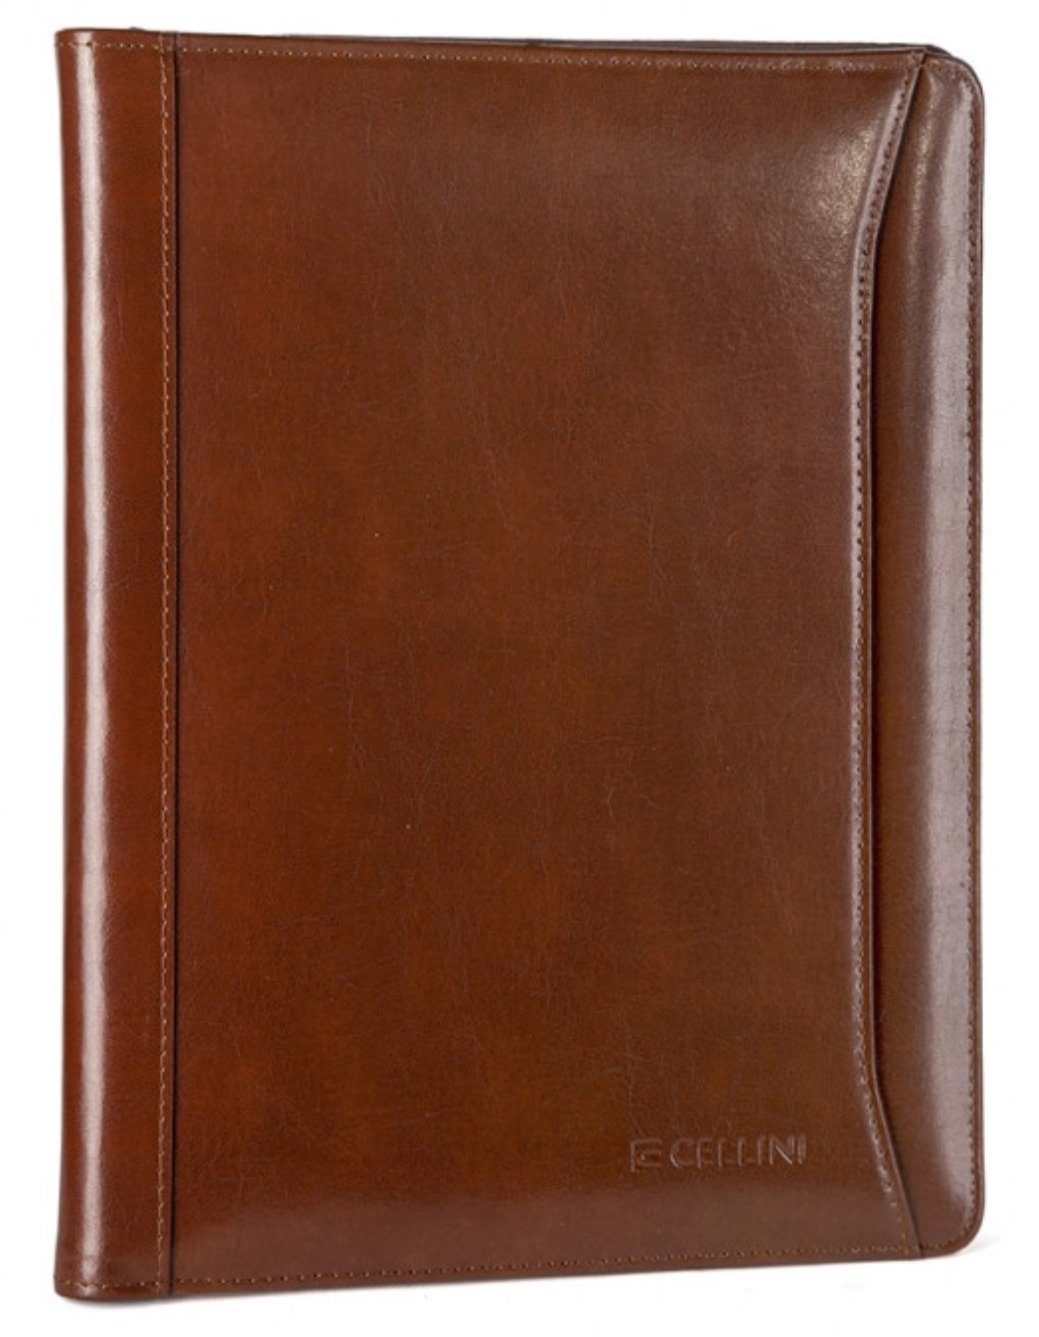 Cellini A4 Leather Folder | Brown - iBags